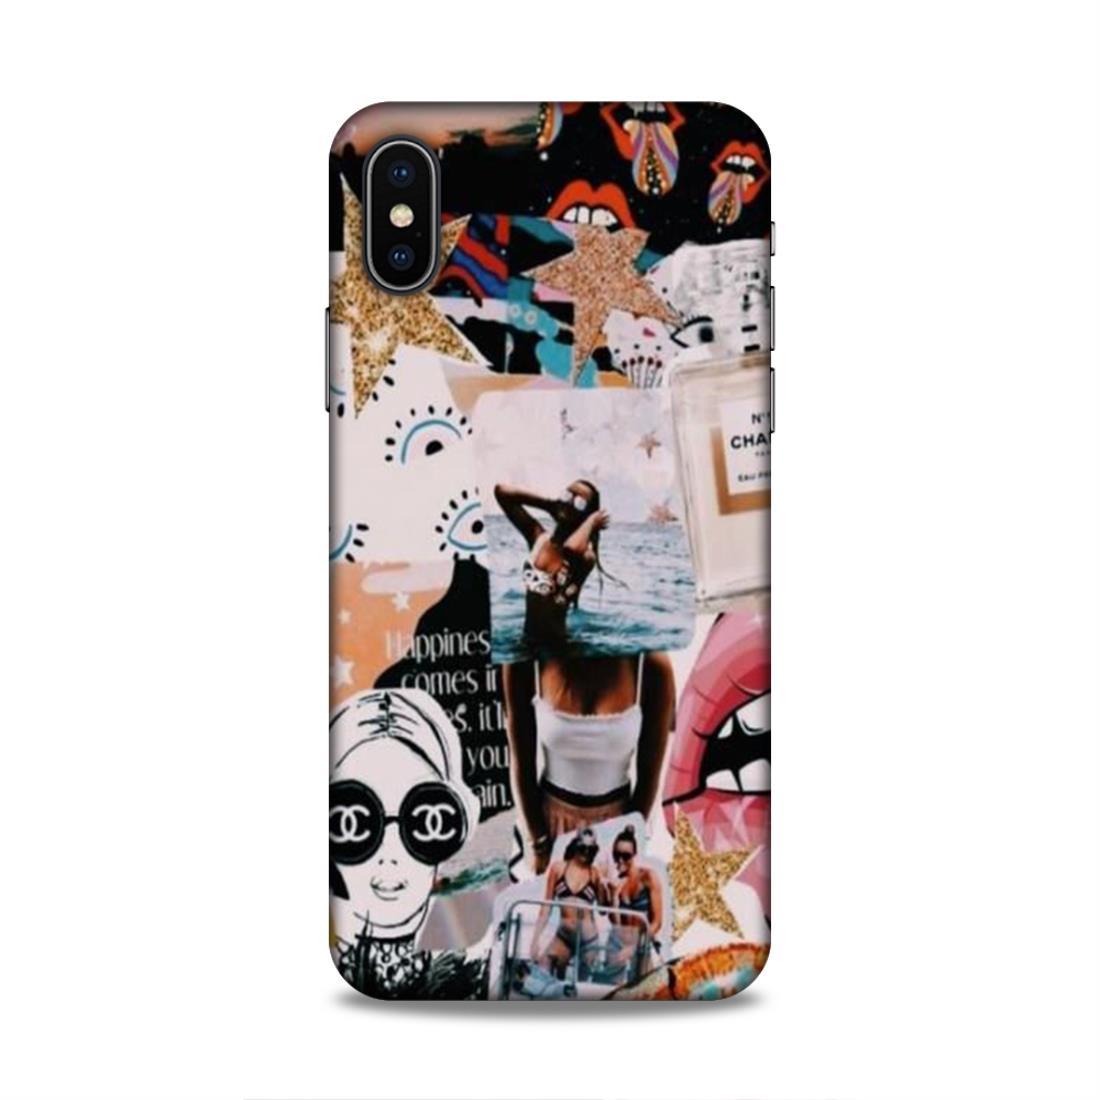 Happy Girl iPhone X Mobile Case Cover